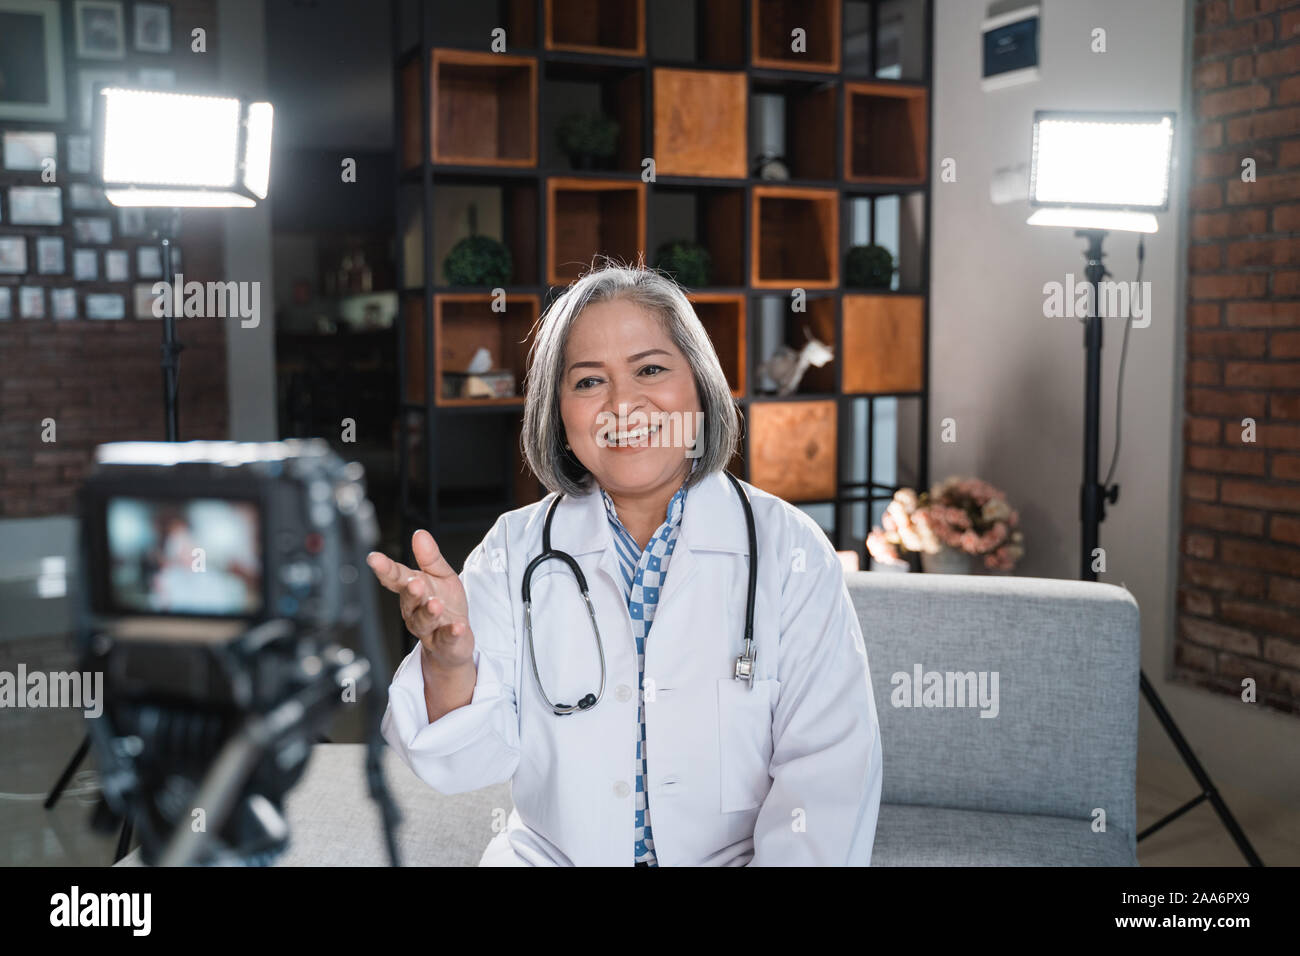 woman doctor recording video for his blog Stock Photo